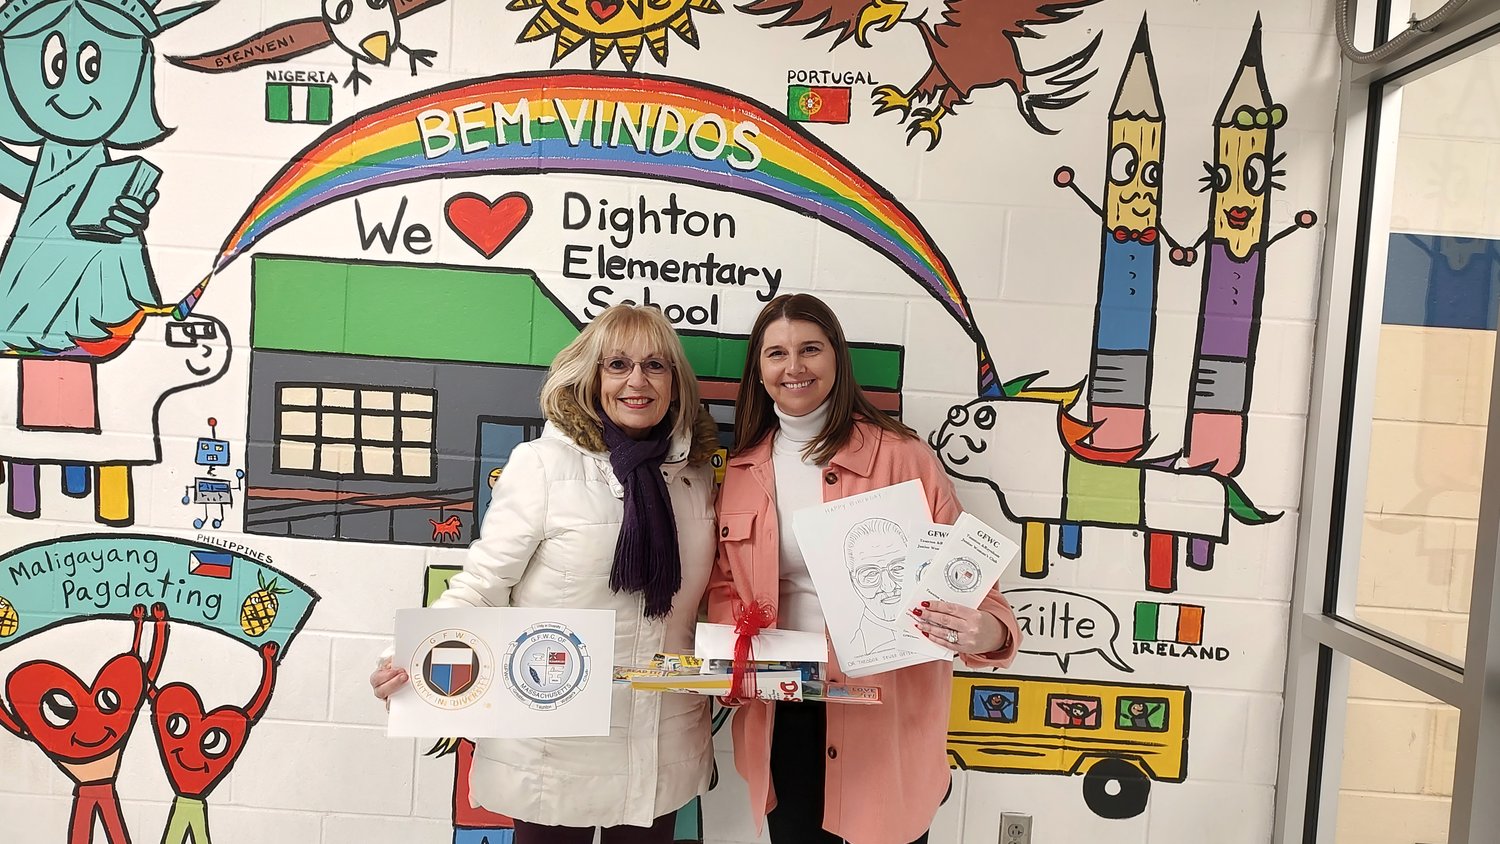 Nancy Brown delivering package to Katelyn Lima, Assistant Principal, Dighton Elementary School.